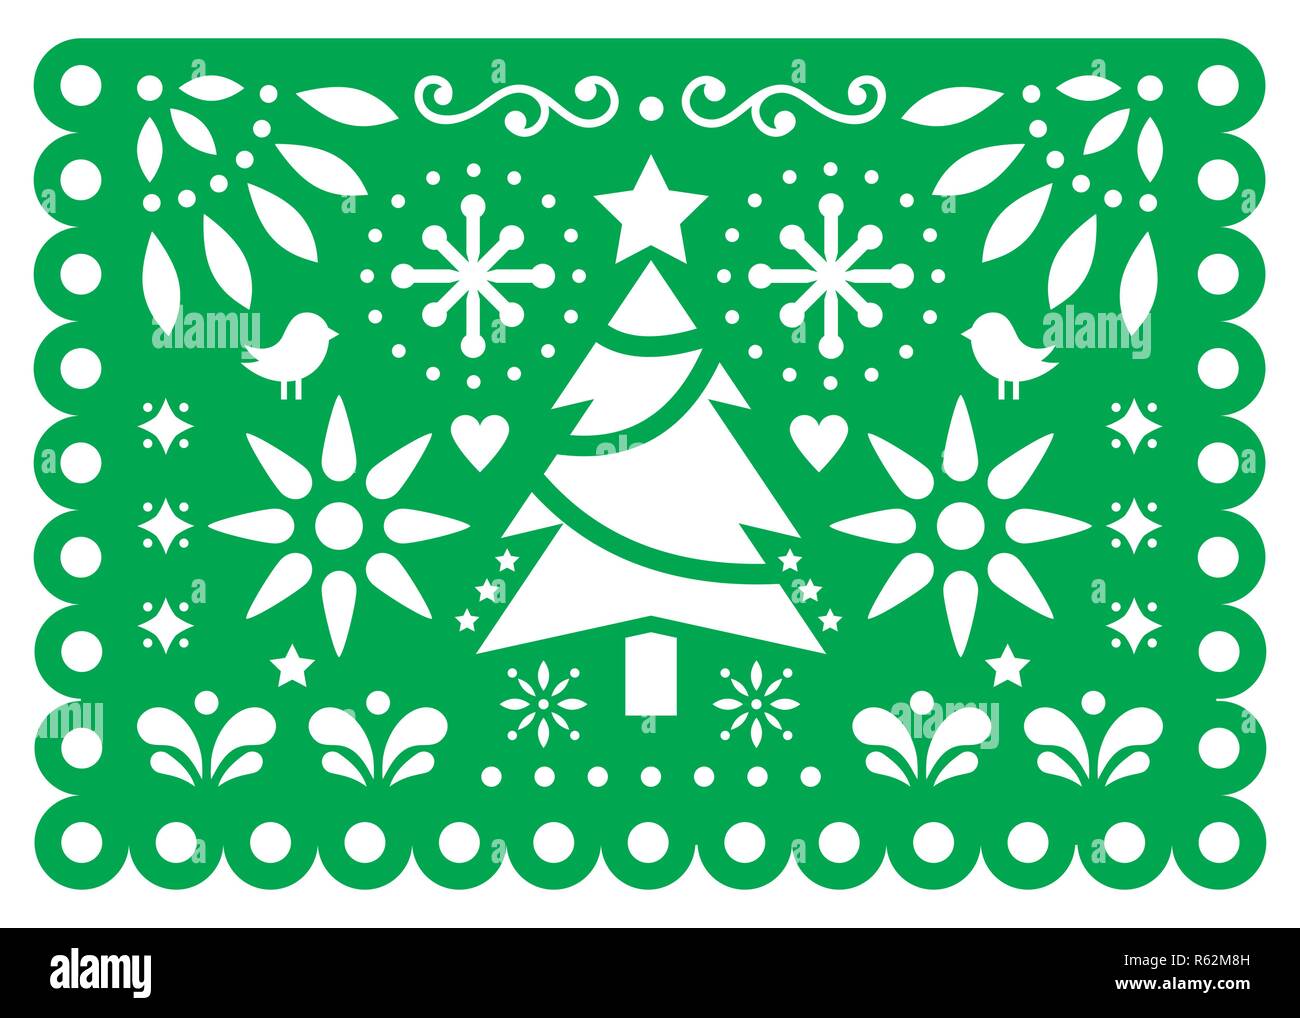 Christmas Papel Picado vector design, Mexican Xmas paper decorations, green and white 5x7 greeting card pattern Stock Vector